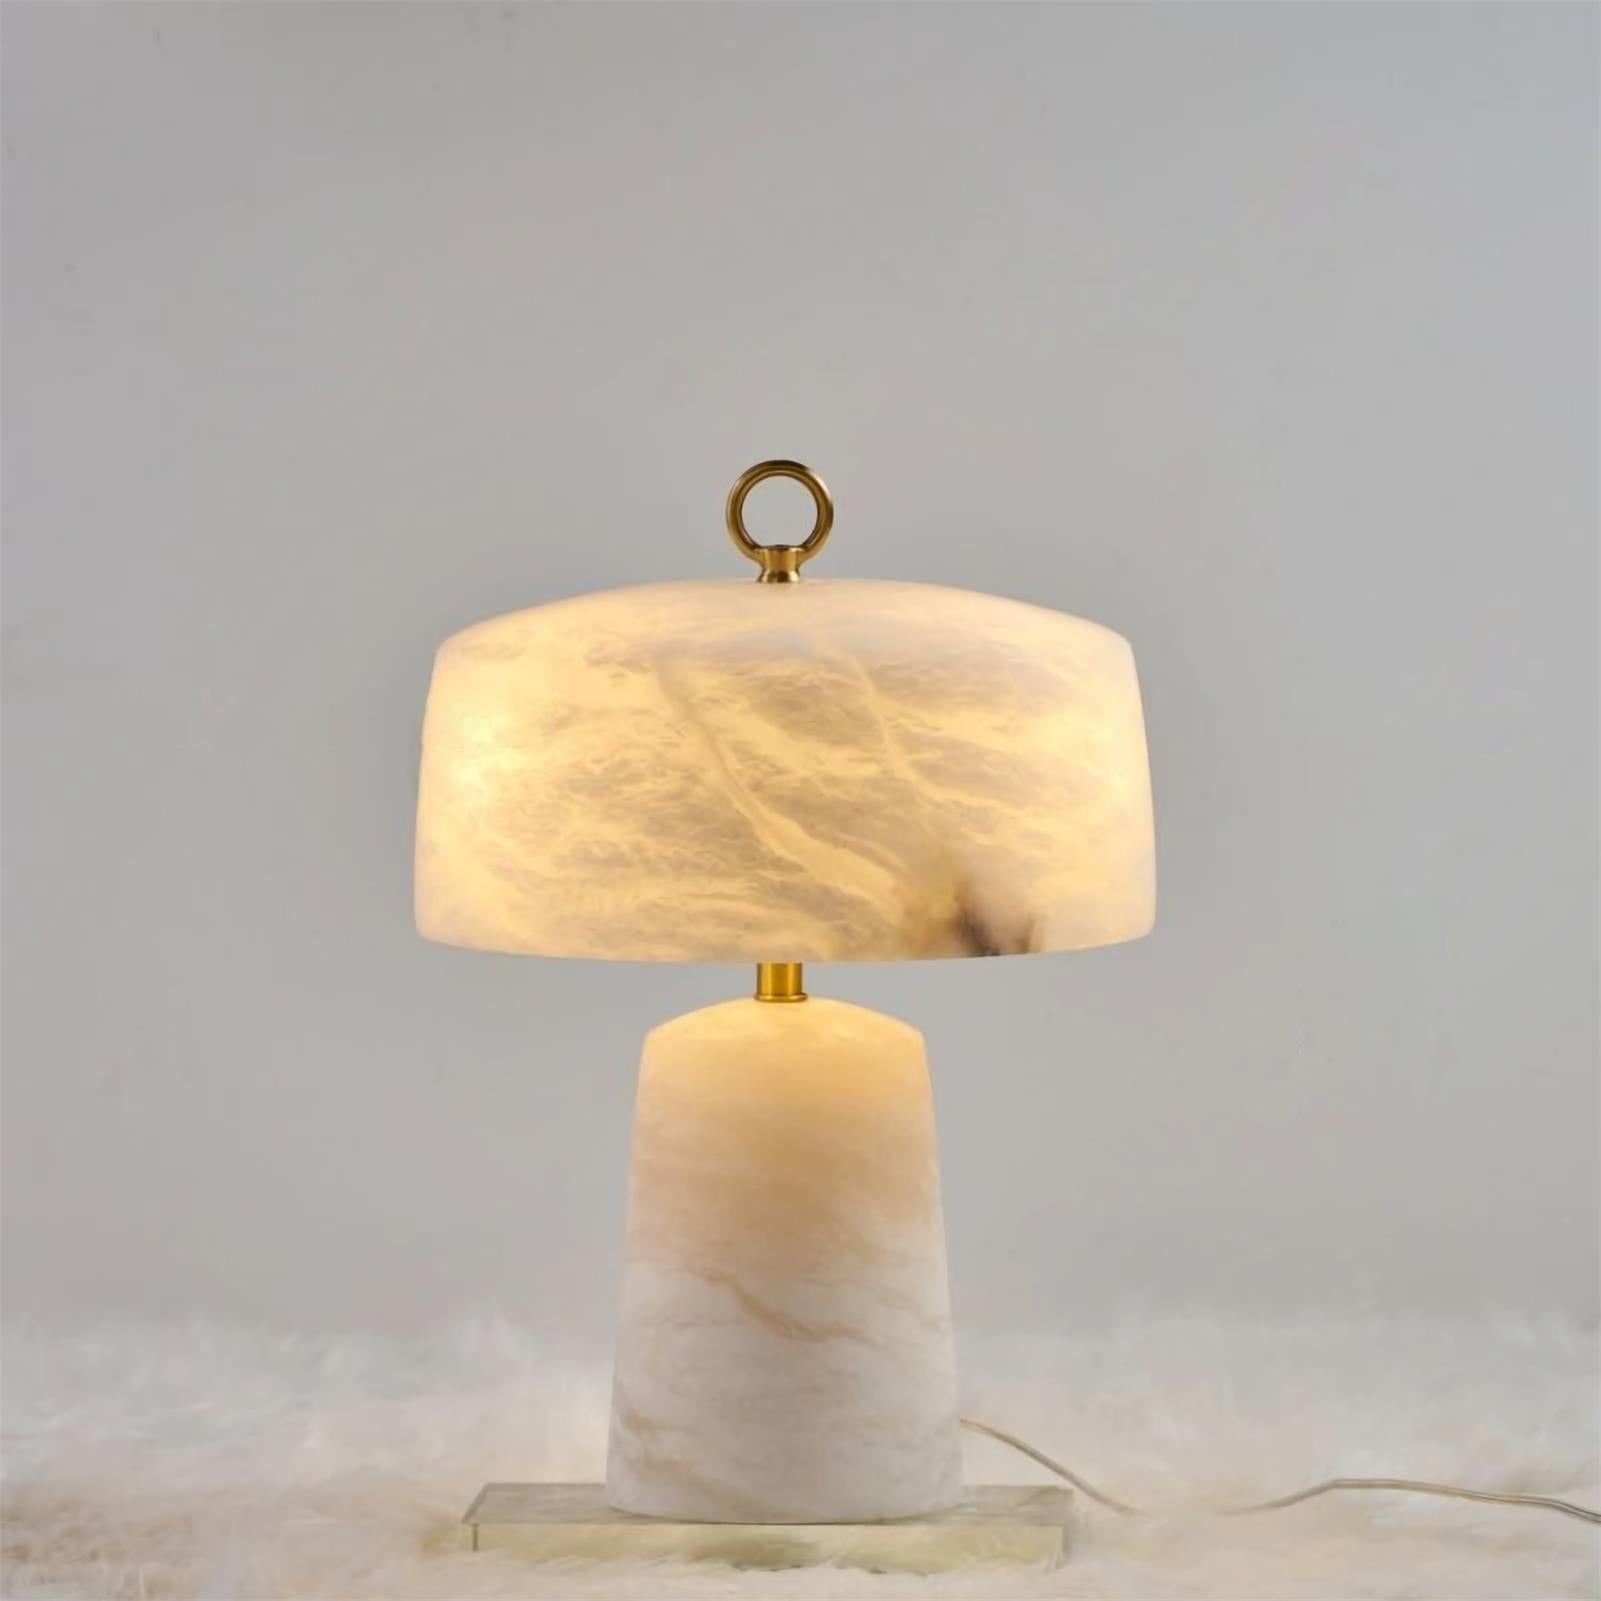 Bedroom Table Lamps Elegant Lighting Choices for Your Bedroom Décor